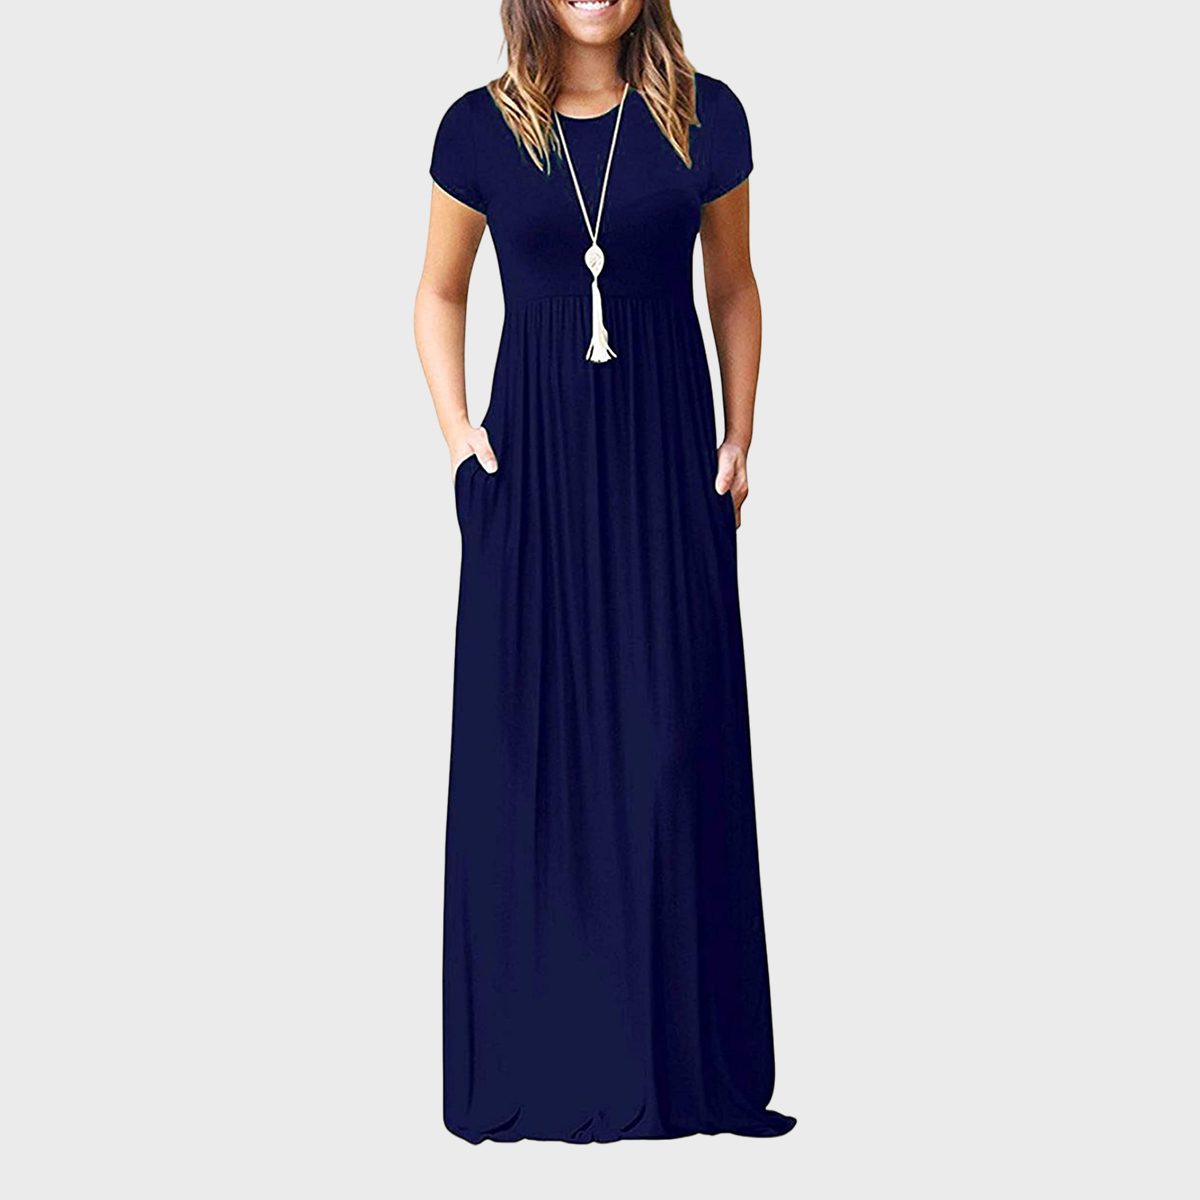 12 Best Maxi Dresses To Feel Comfortable and Confident In Any Season